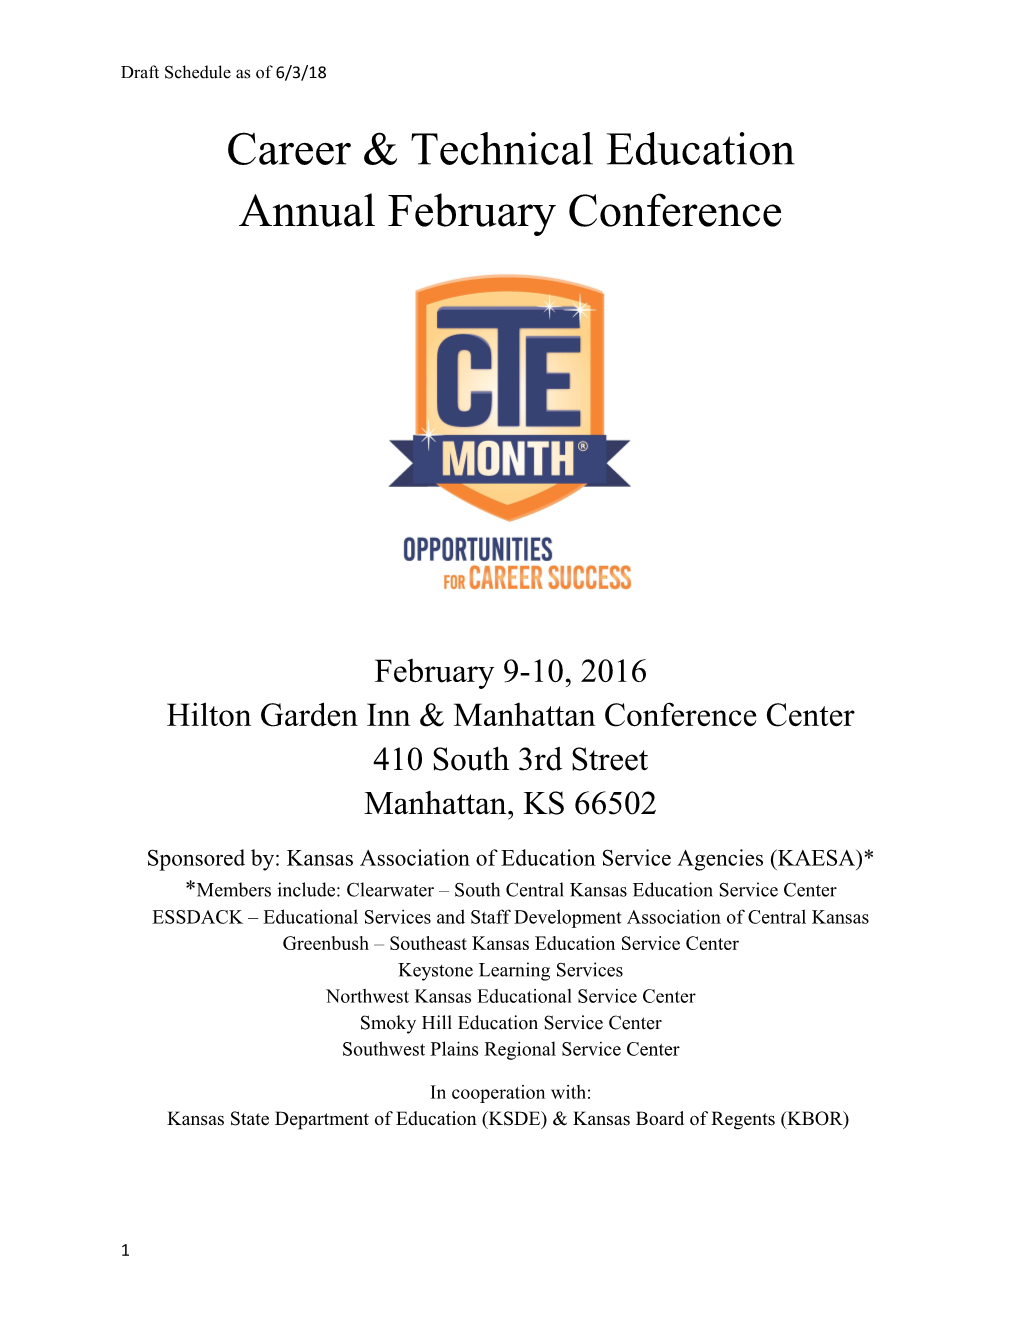 Career & Technical Education Annual February Conference